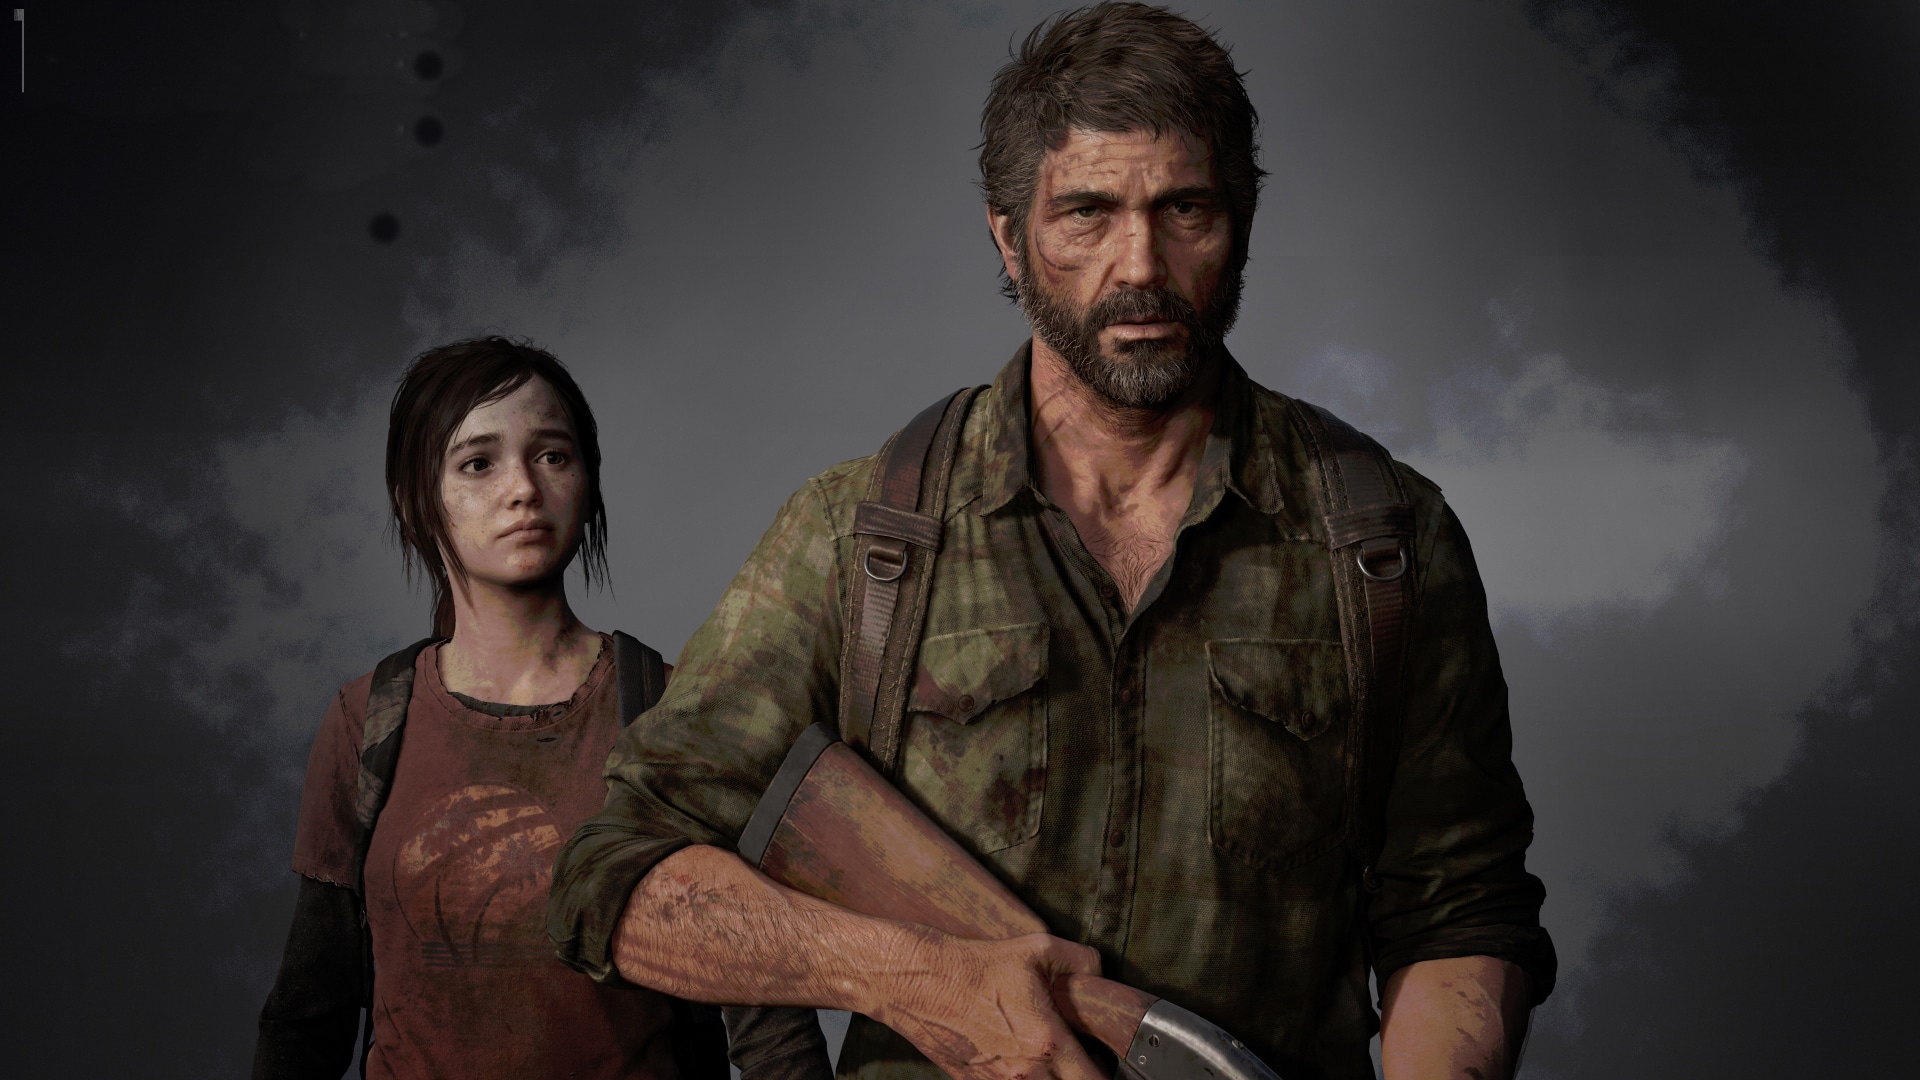 The Last of Us TV show: release date and everything we know